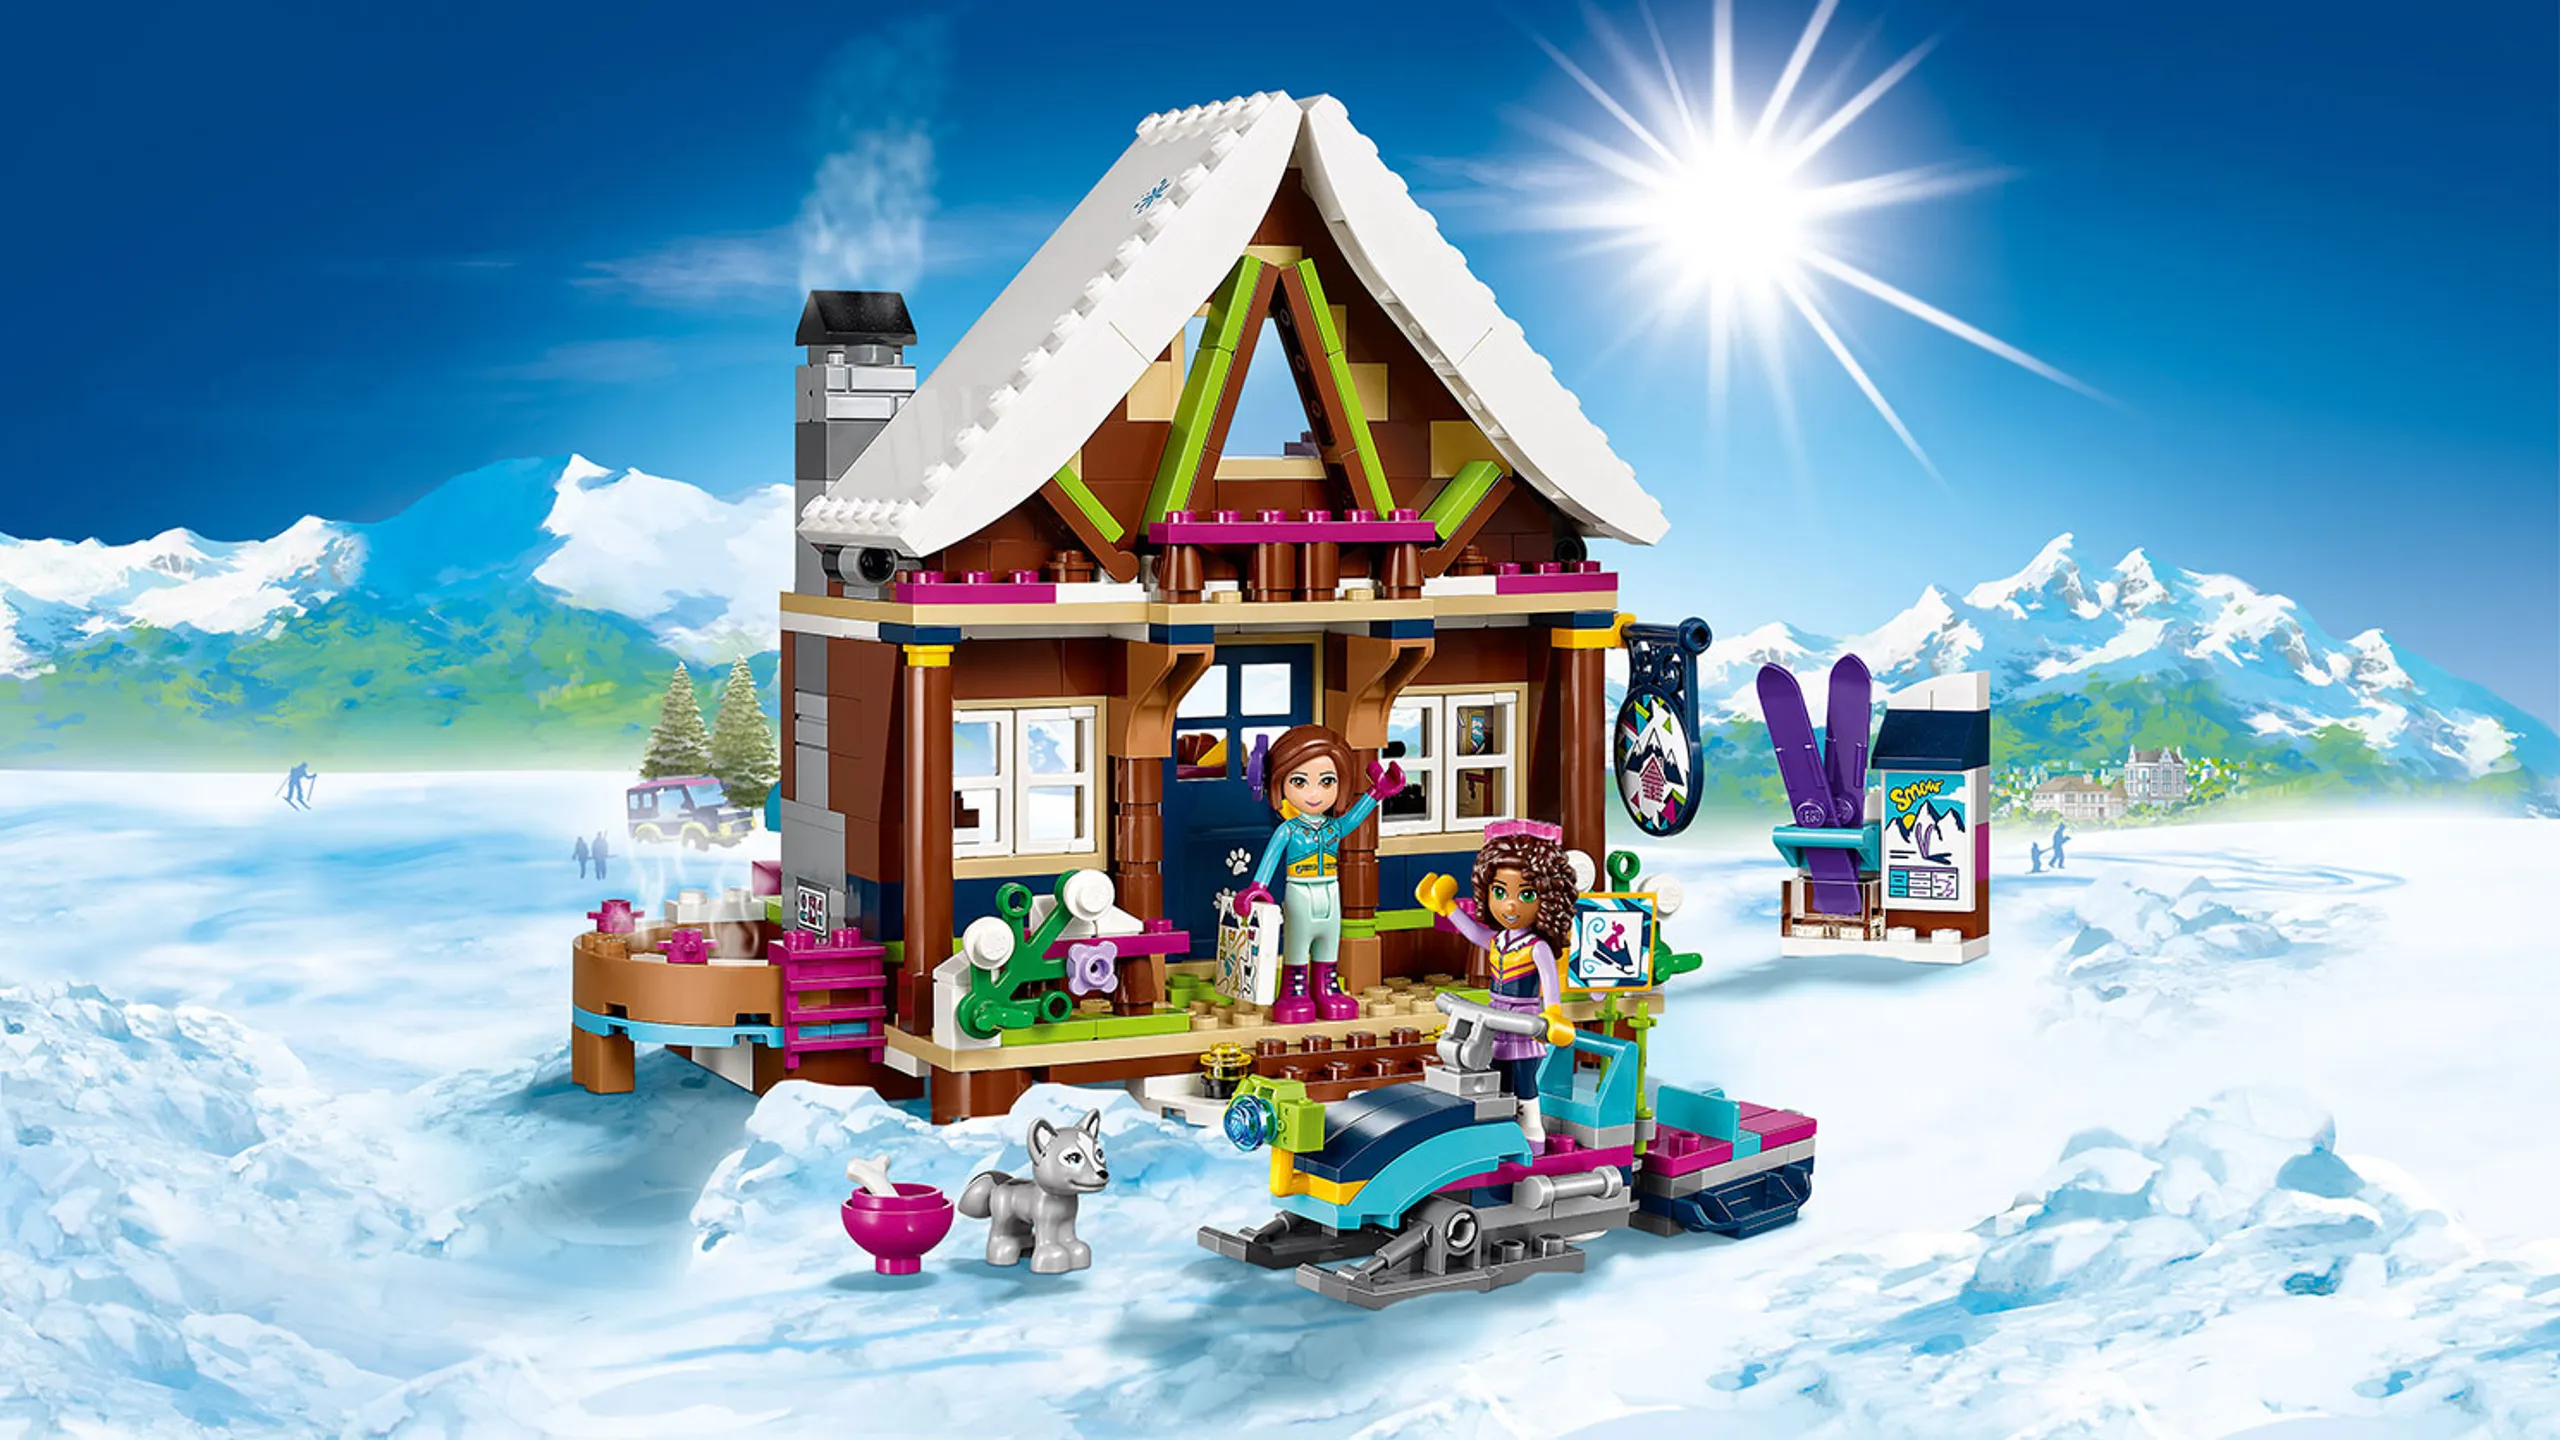 LEGO Friends - 41323 Snow Resort Chalet - Andrea takes a ride on the snowmobile while Amy stays at the log cabin with the husky puppy.